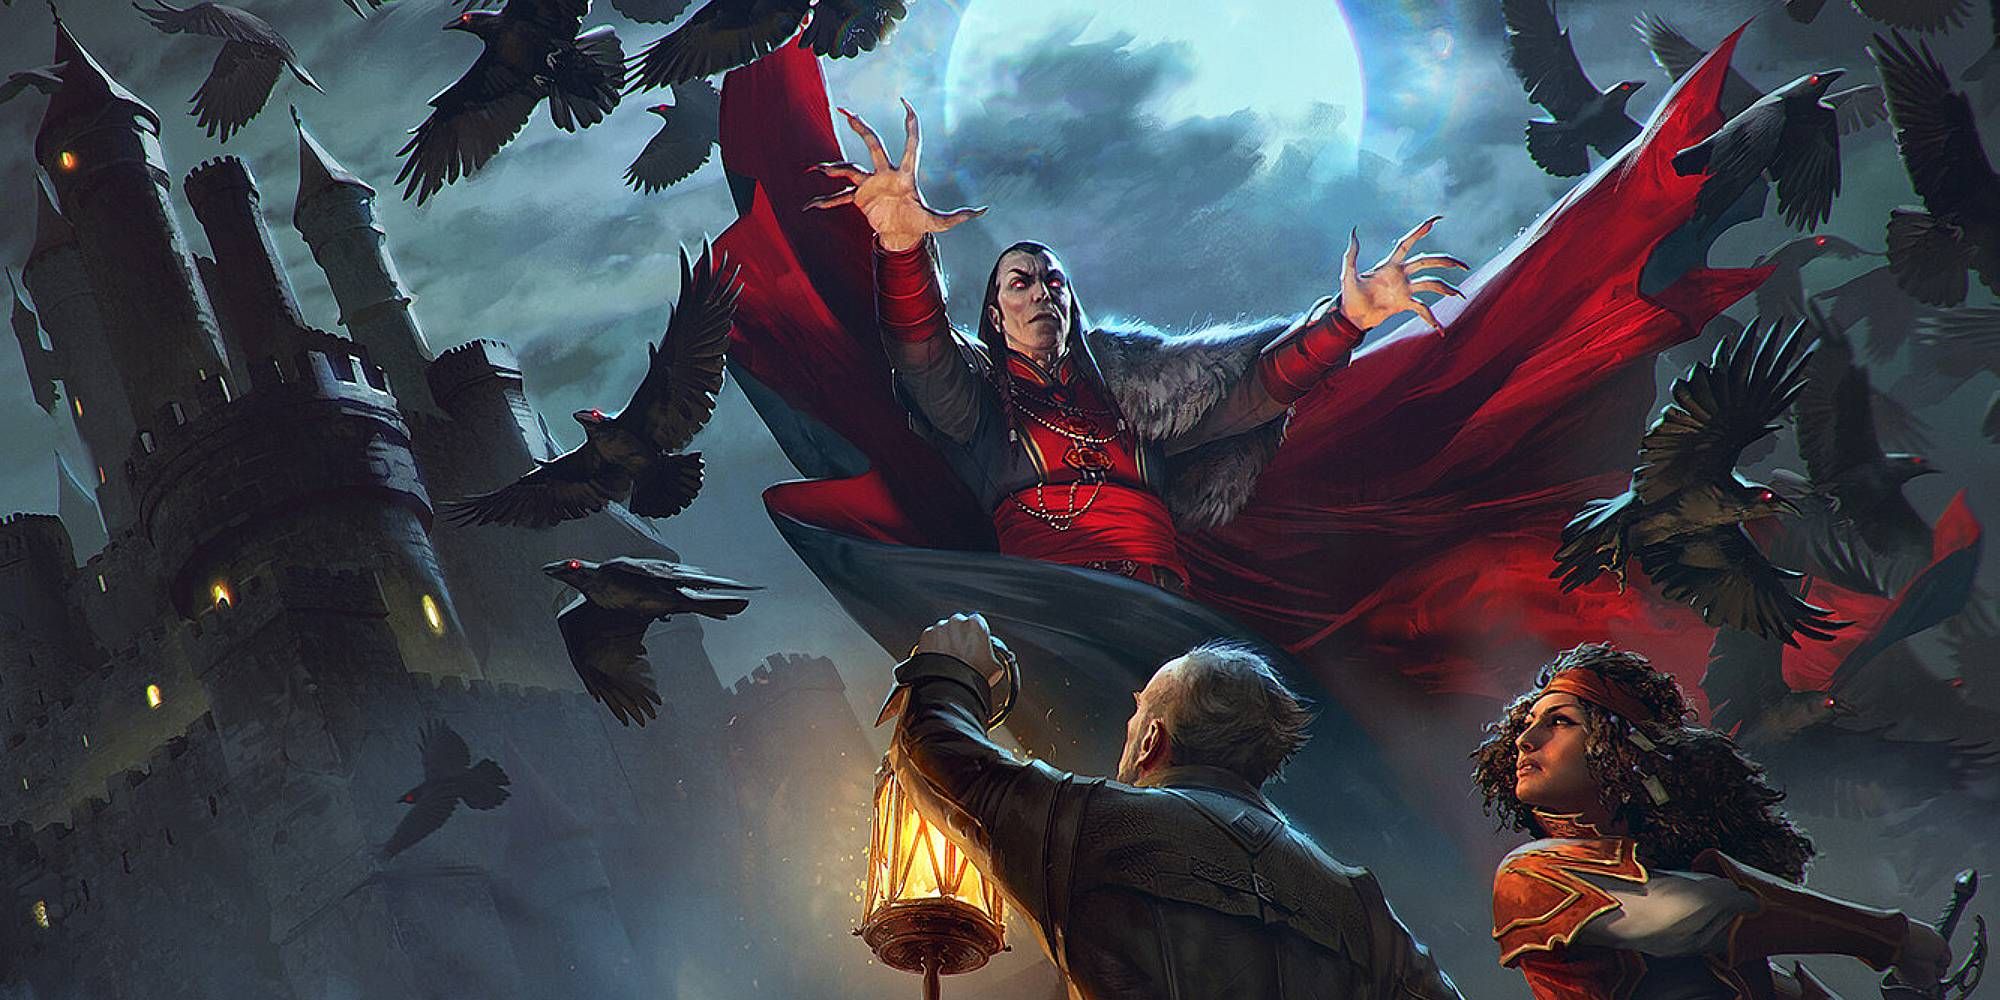 A vampire looms over the two figures as crows fly about against the backdrop of a castle.